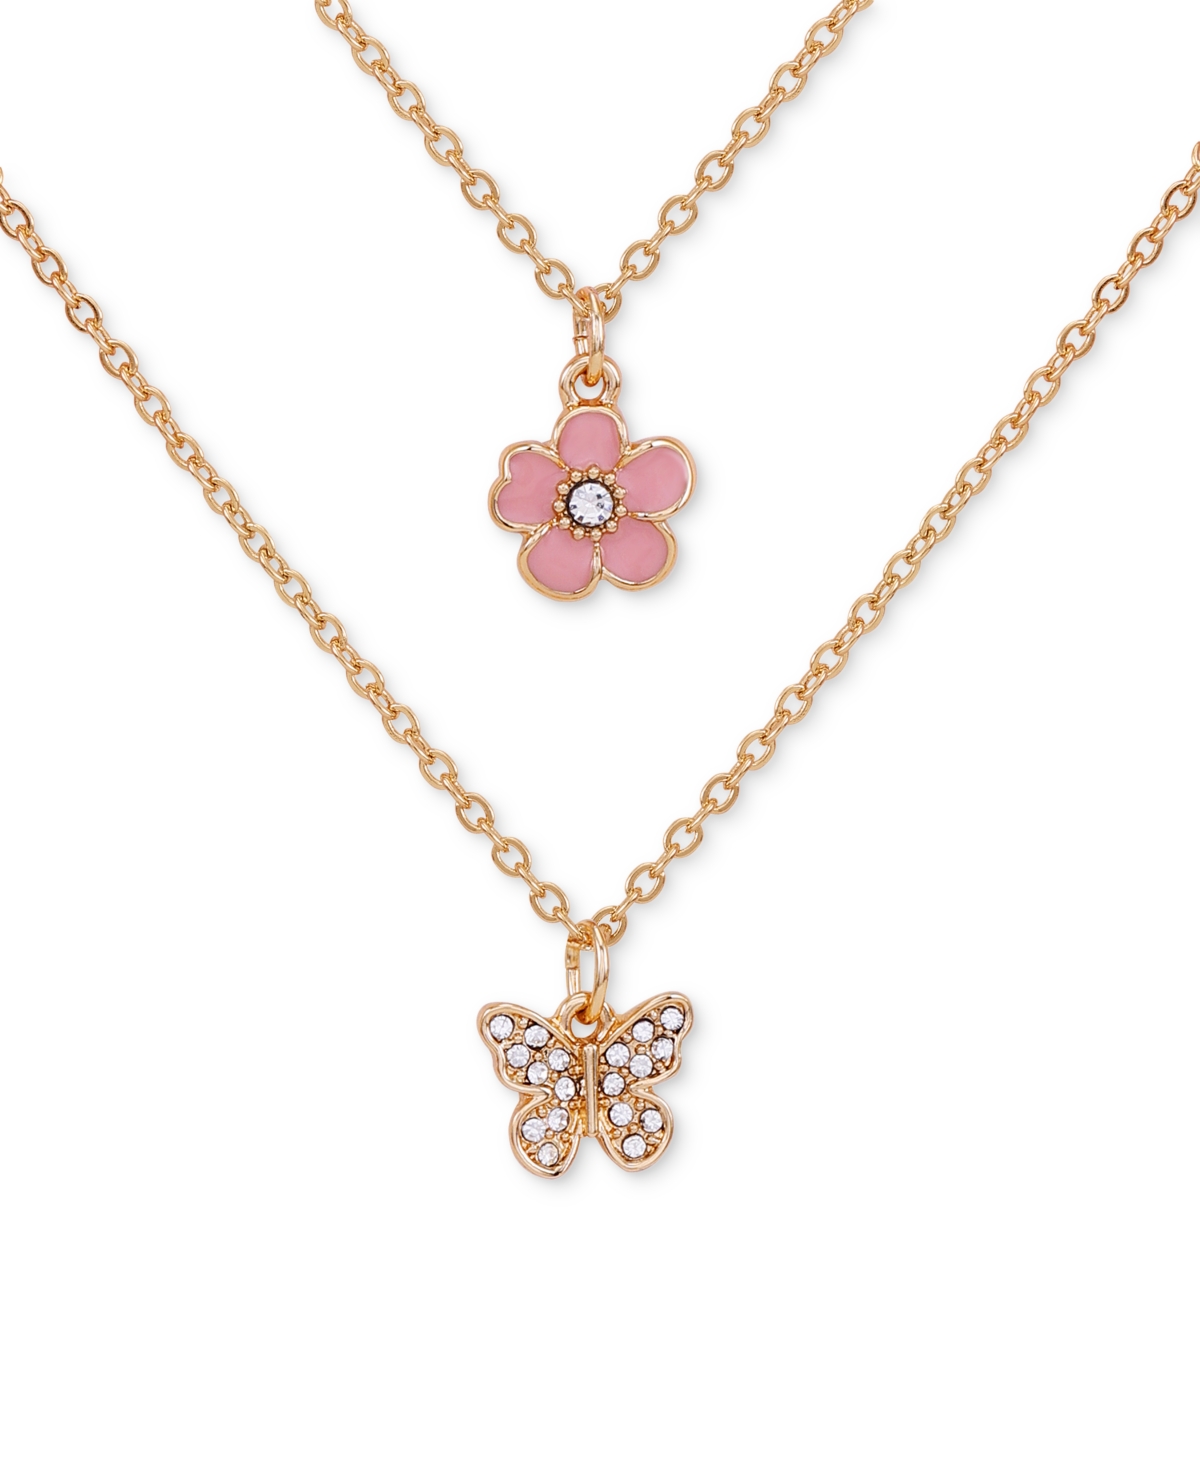 Guess Gold-tone 2-pc. Pink Flower & Pave Butterfly Pendant Necklaces Set, 16" + 2" Extender